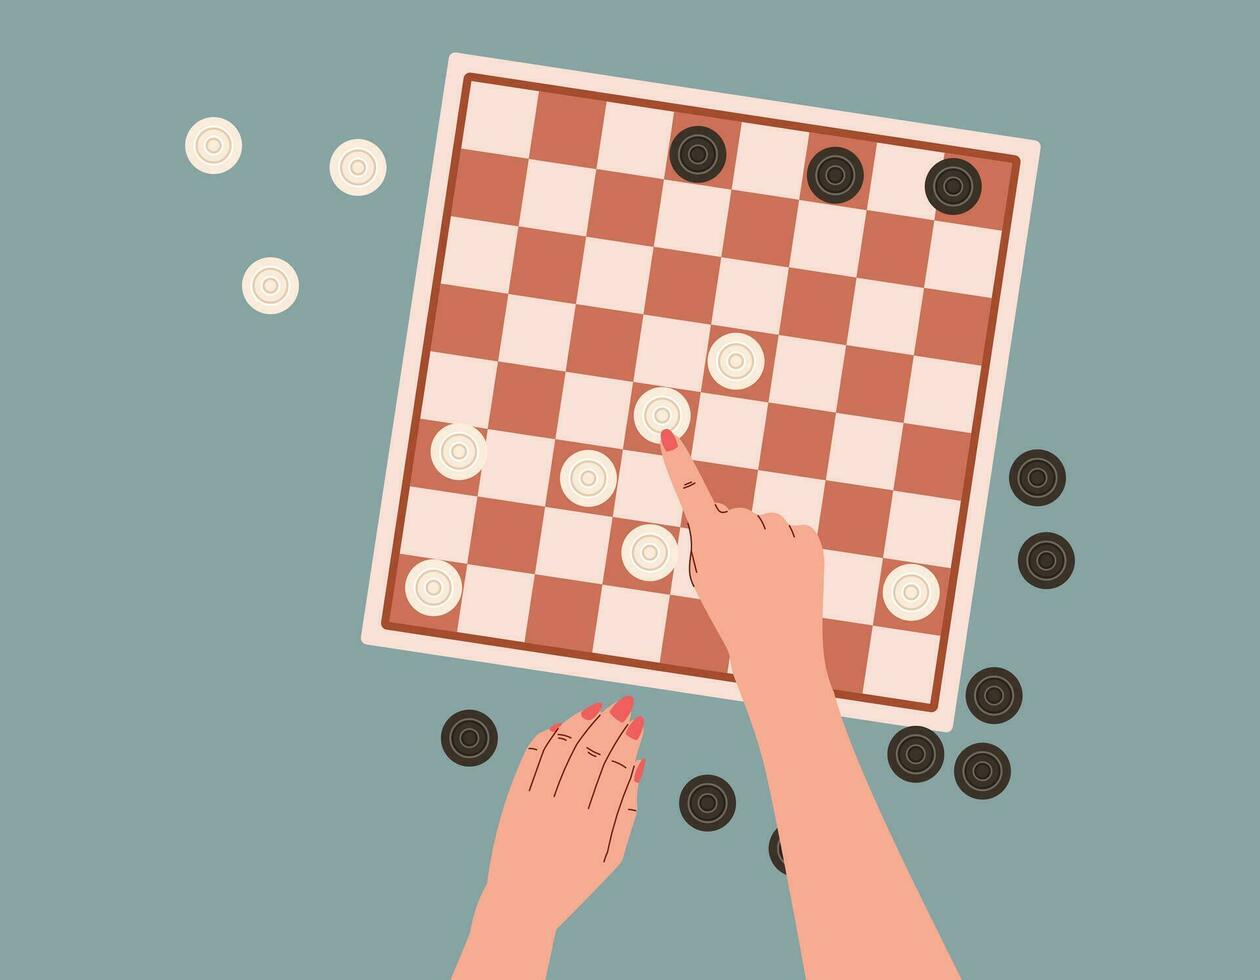 Flat People playing checkers, top view. Hands making a move in a logic board game. Cartoon isolated vector chess board.